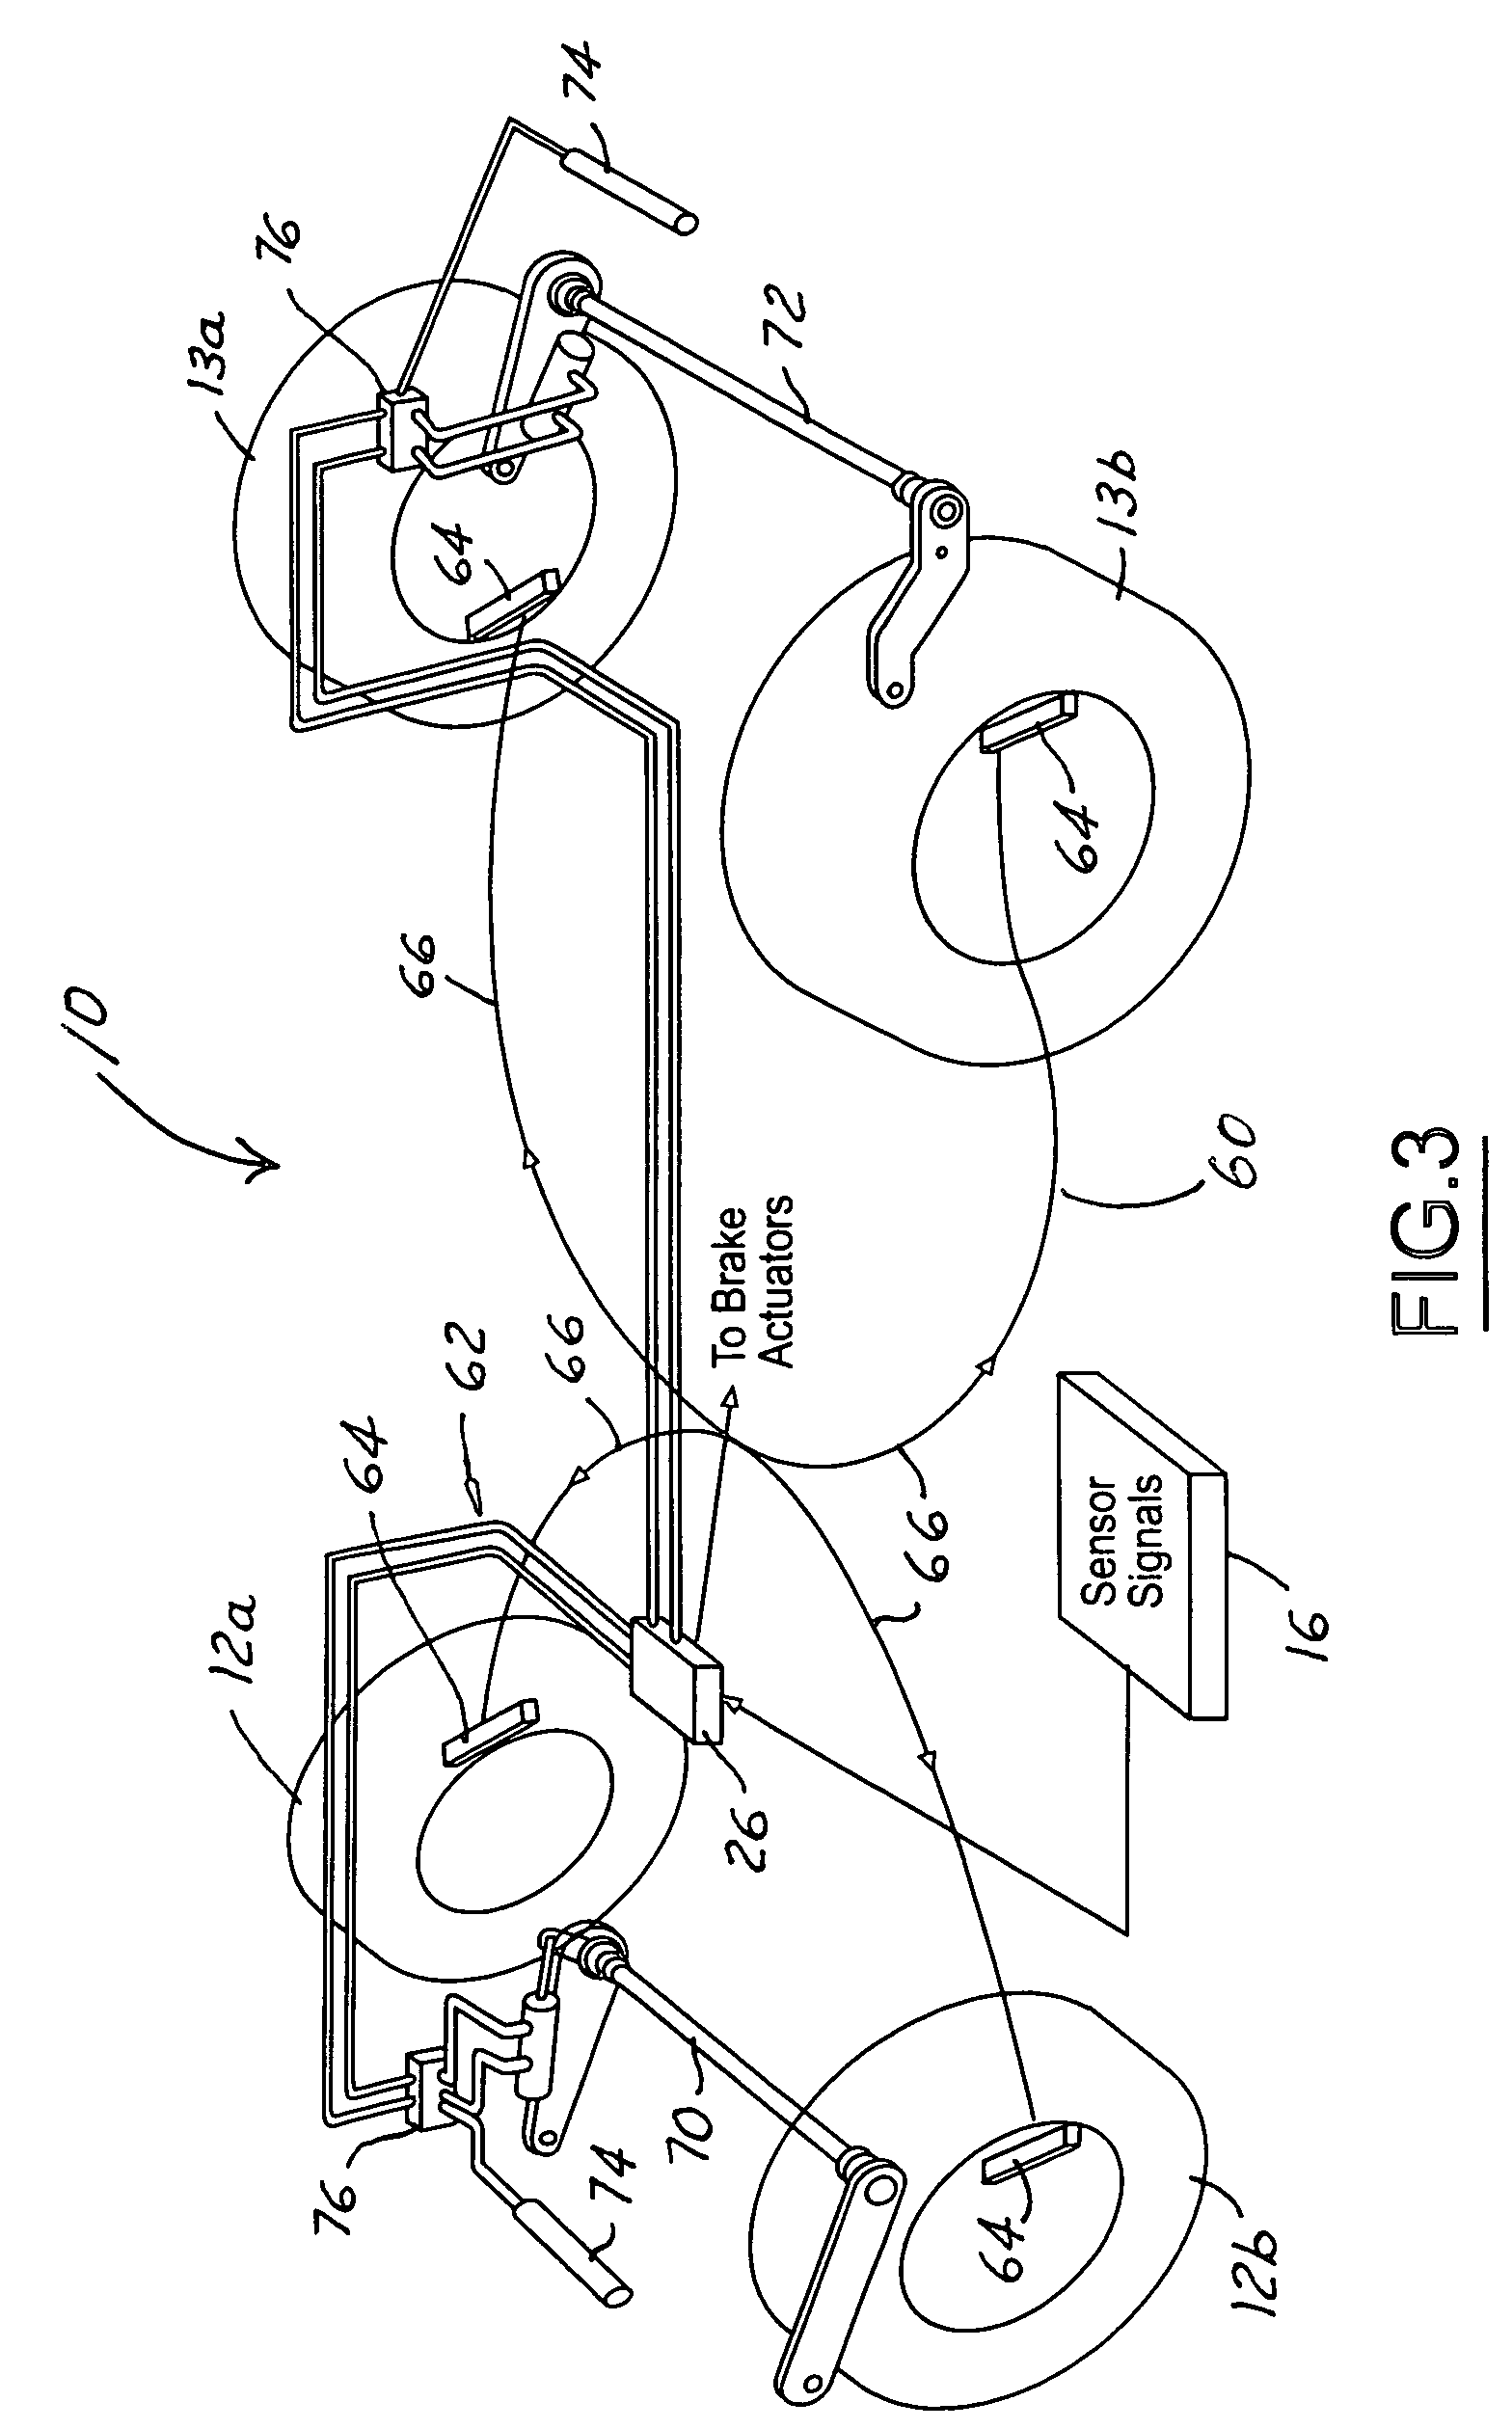 Roll stability control system for an automotive vehicle using coordinated control of anti-roll bar and brakes